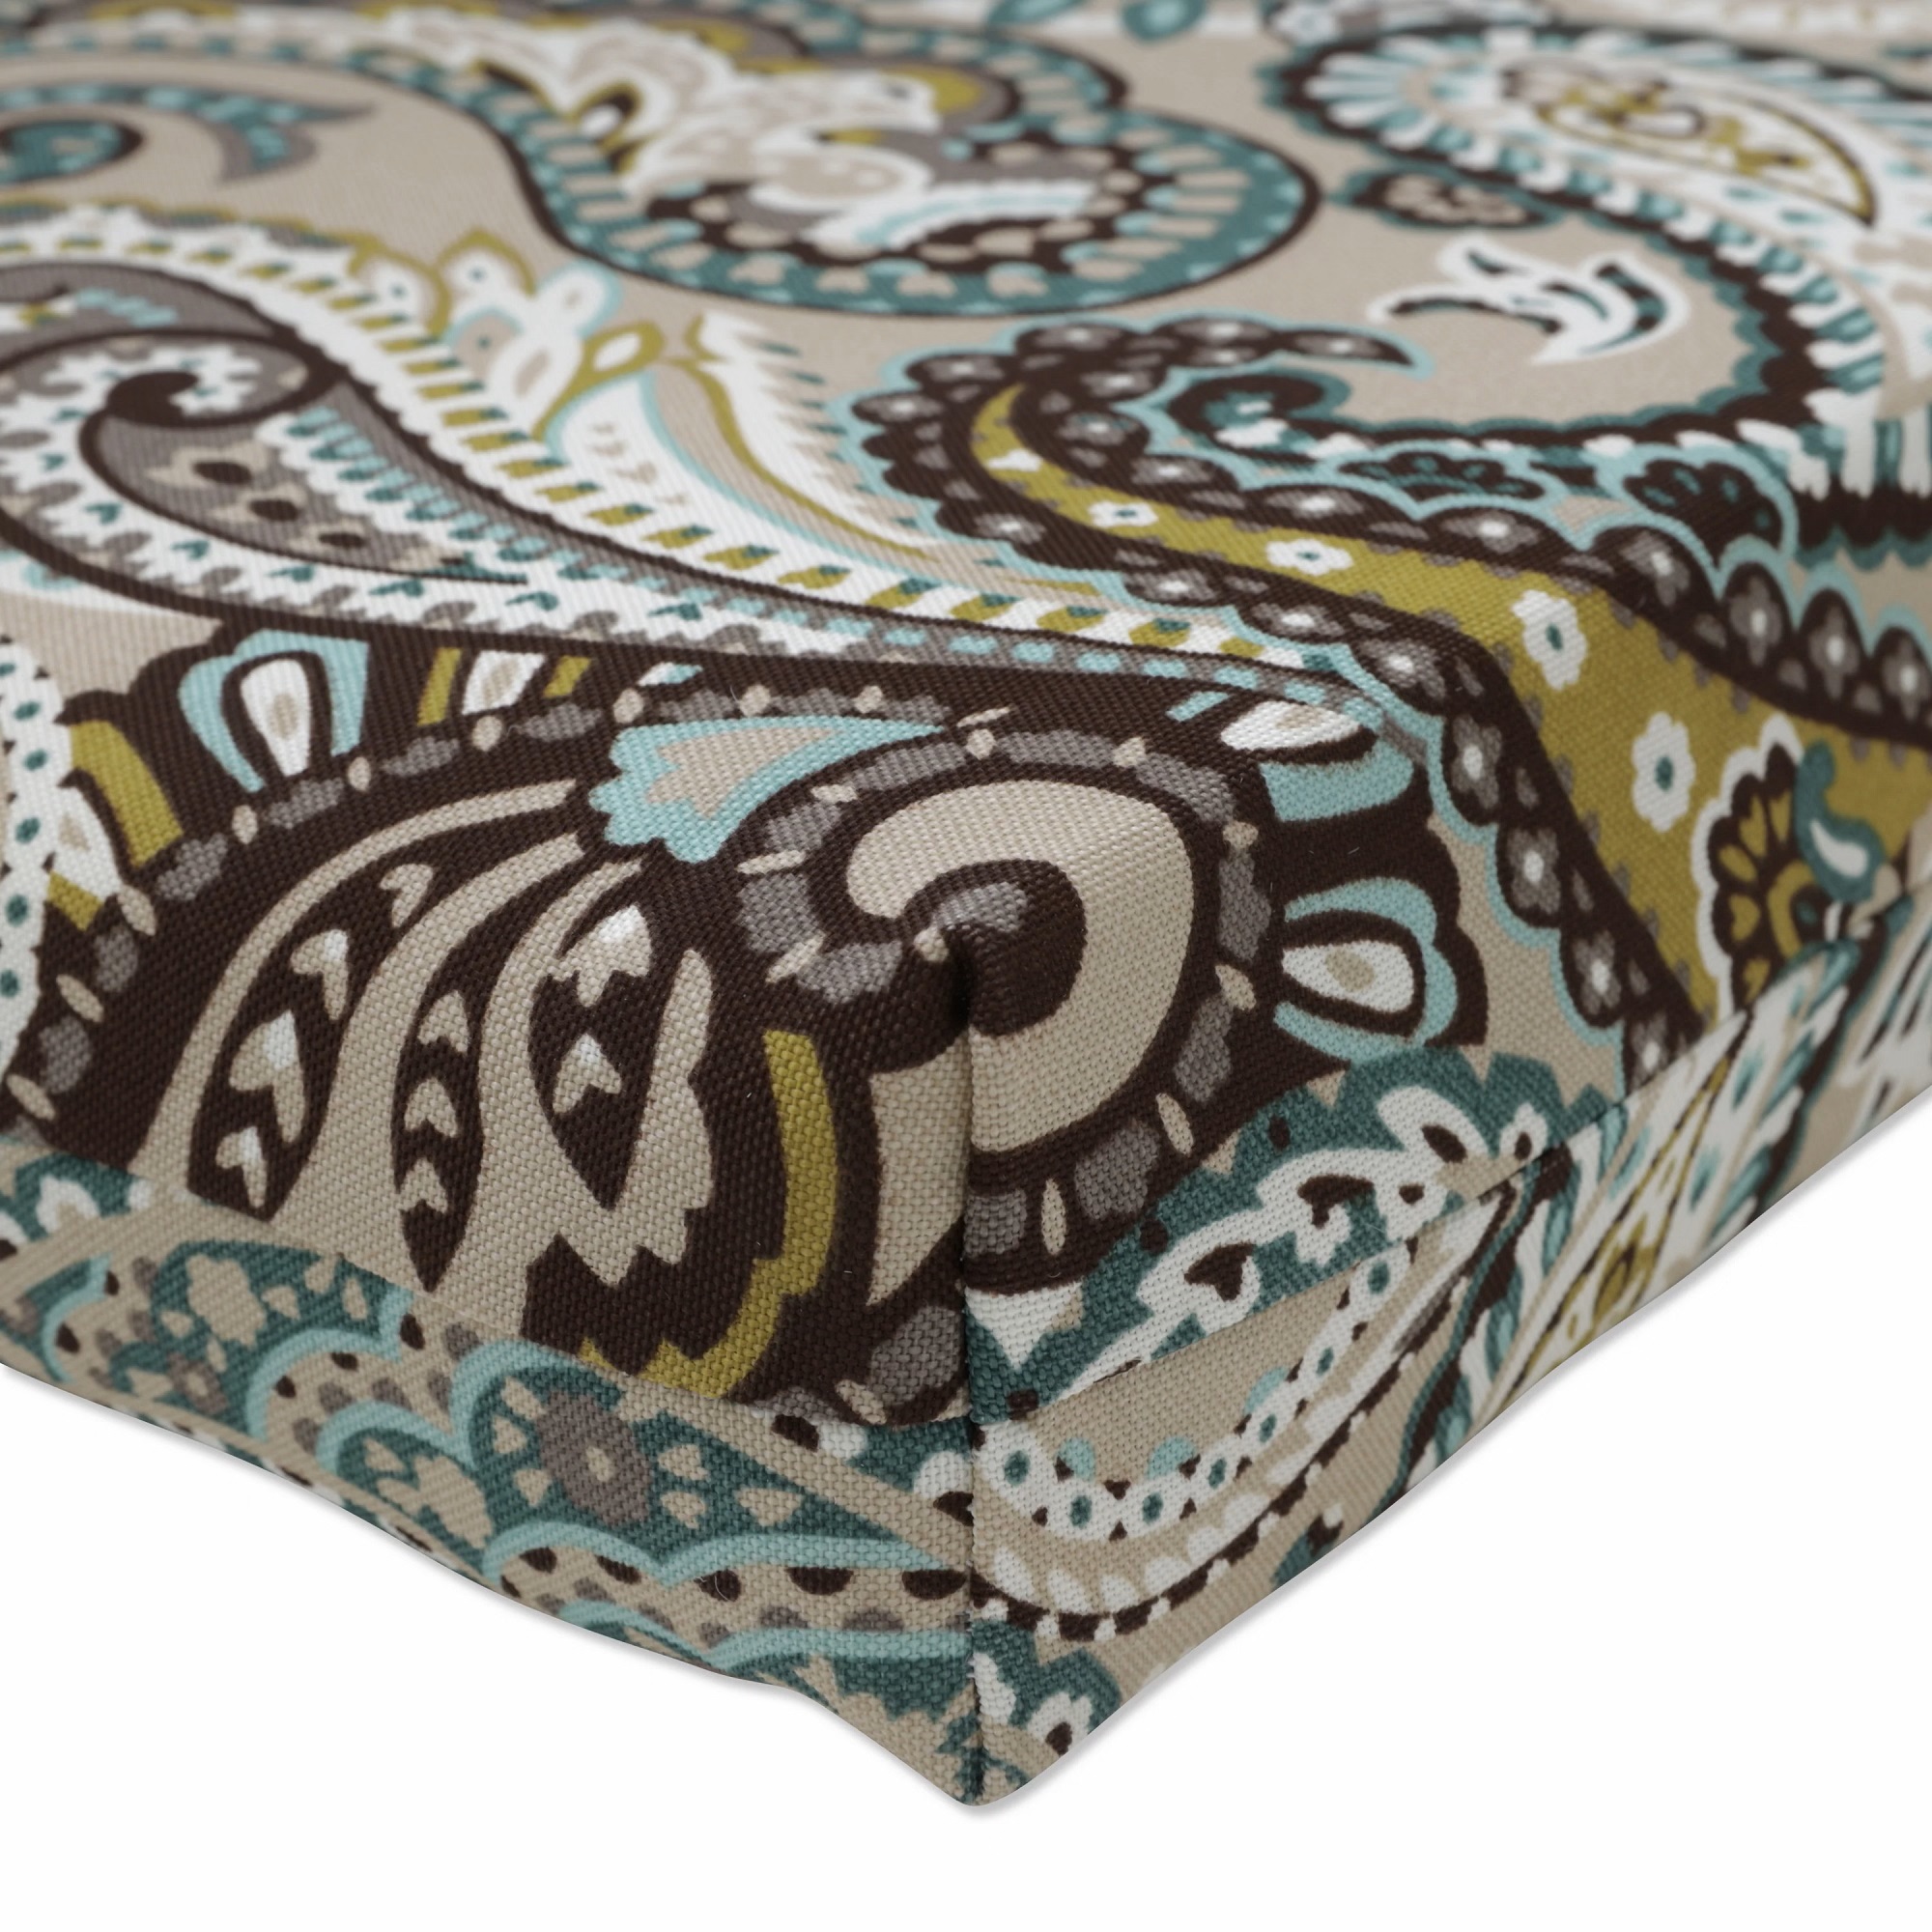 Pillow Perfect 80" Blue and Brown Paisley Outdoor Patio Chaise Lounge Cushion